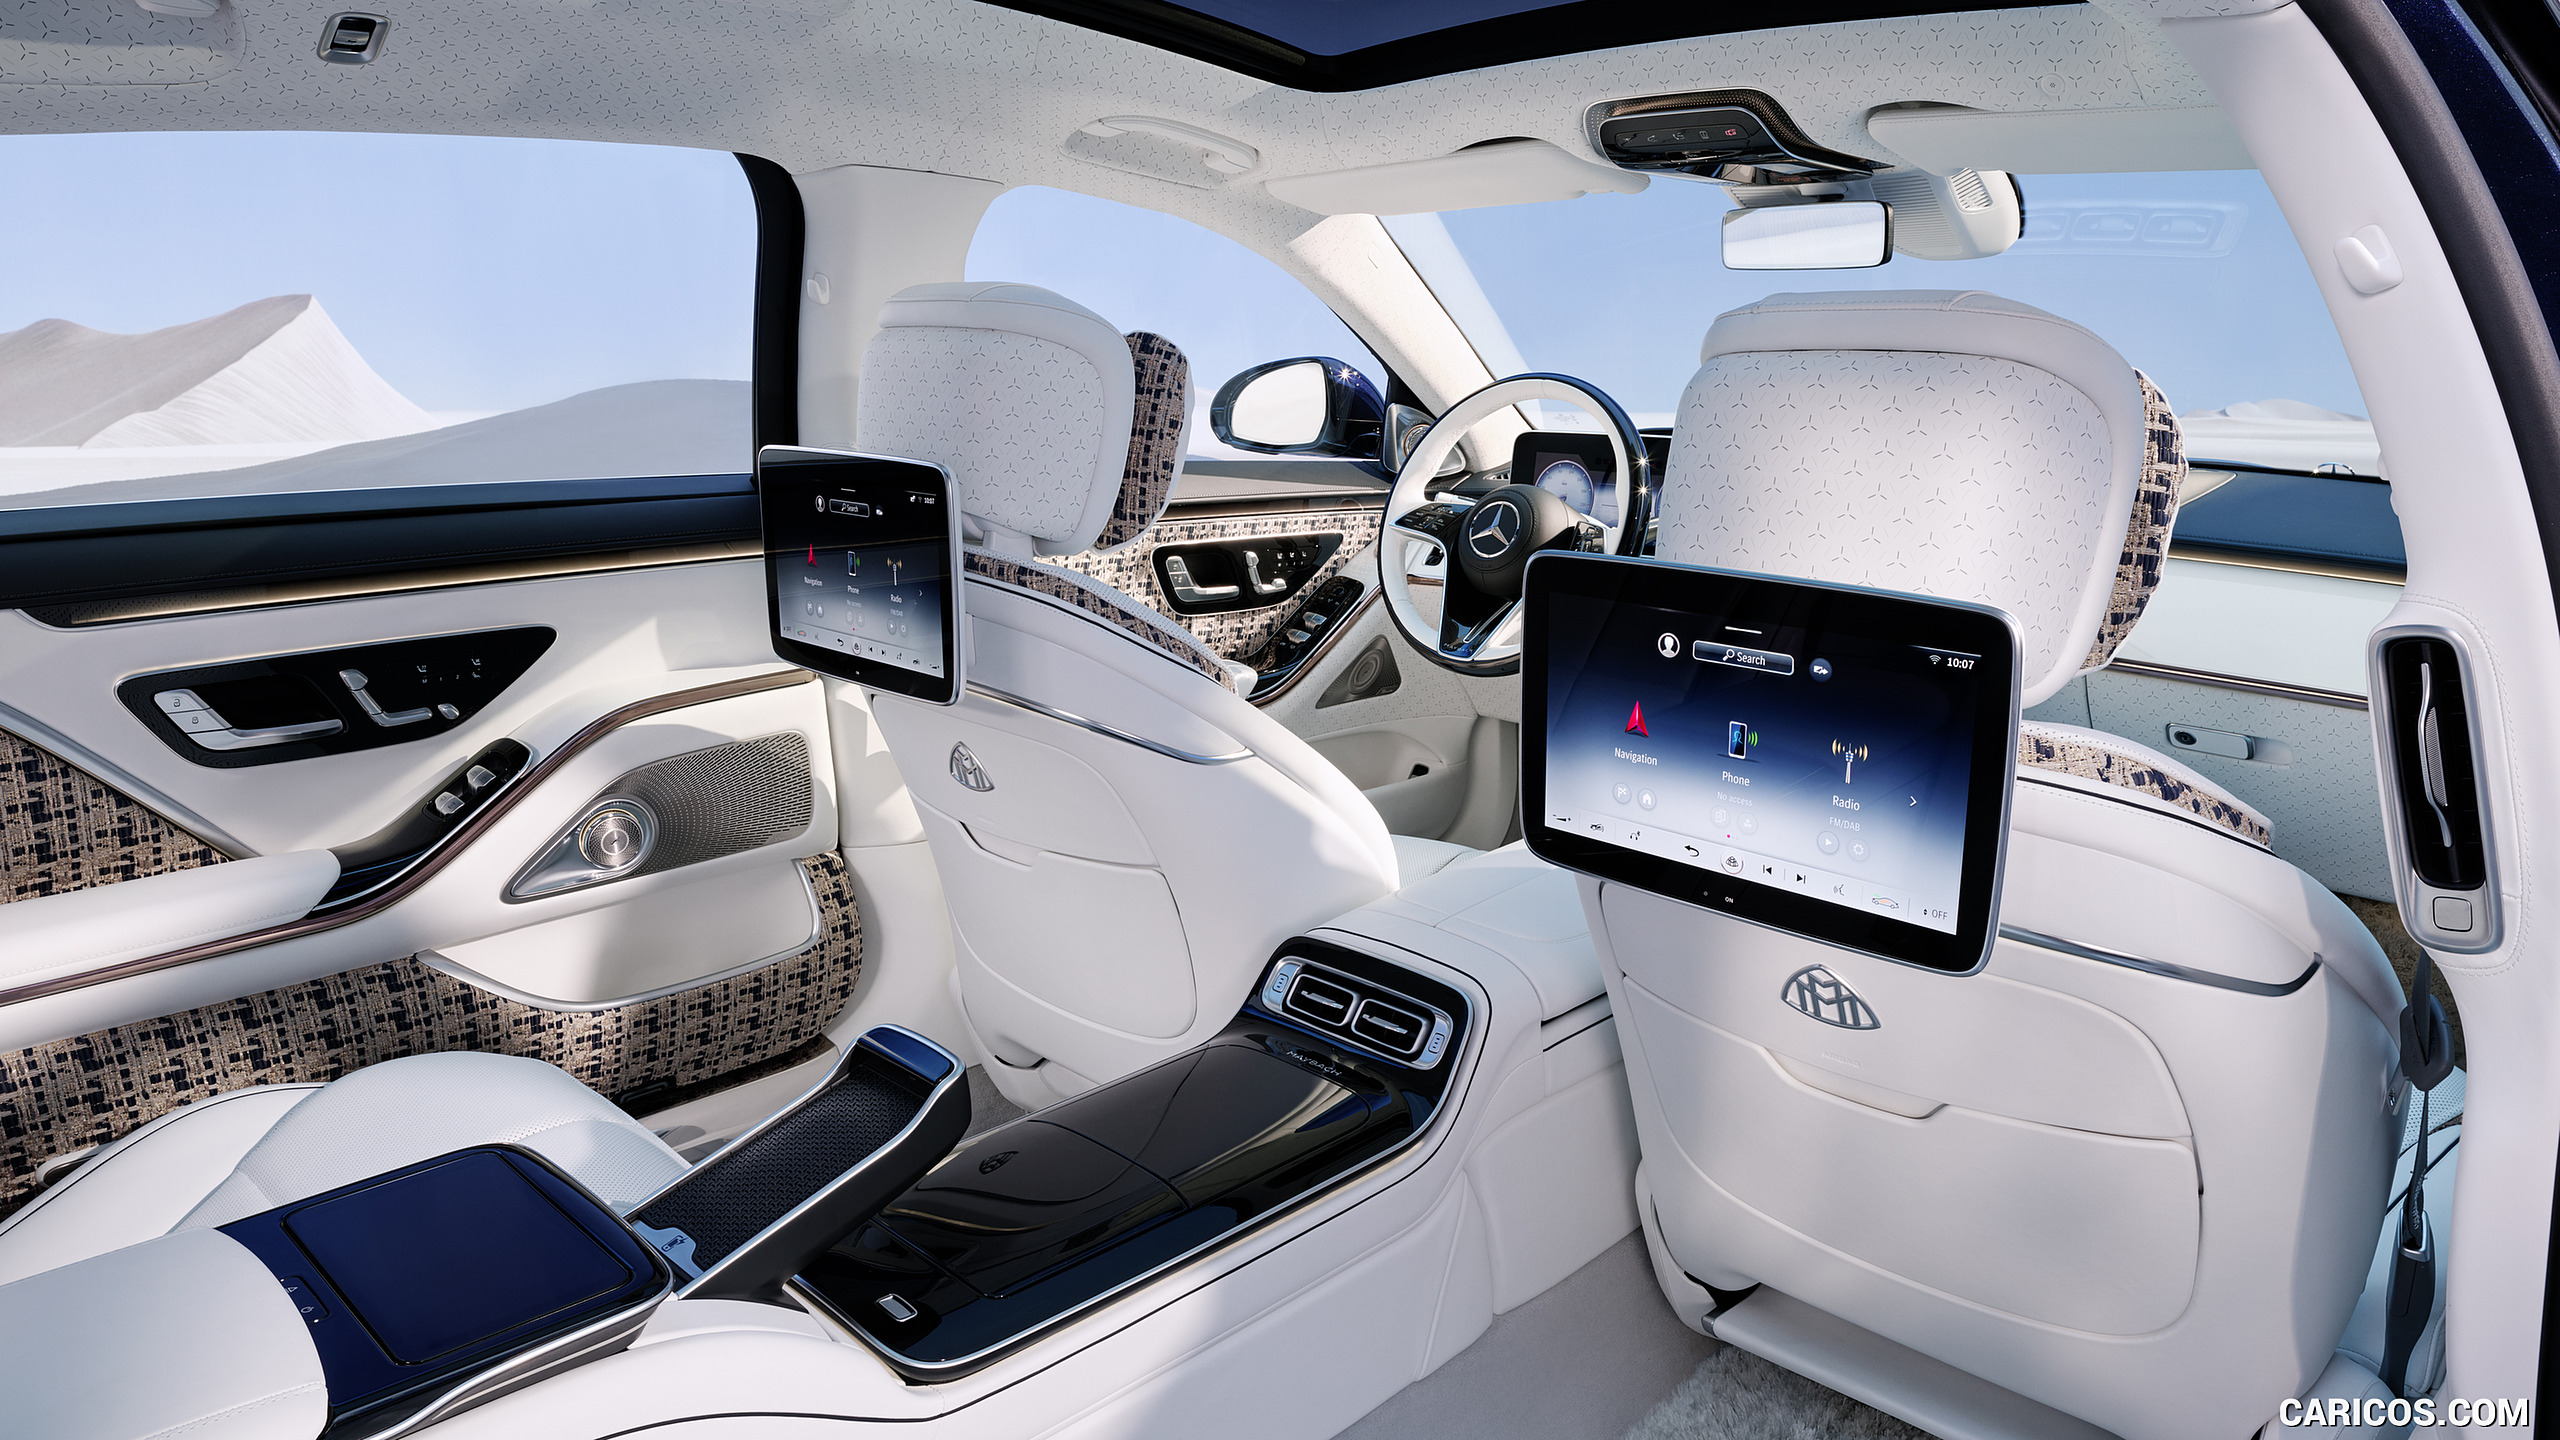 2023 Mercedes-Maybach S-Class Haute Voiture - Interior, Rear Seats, #18 of 29